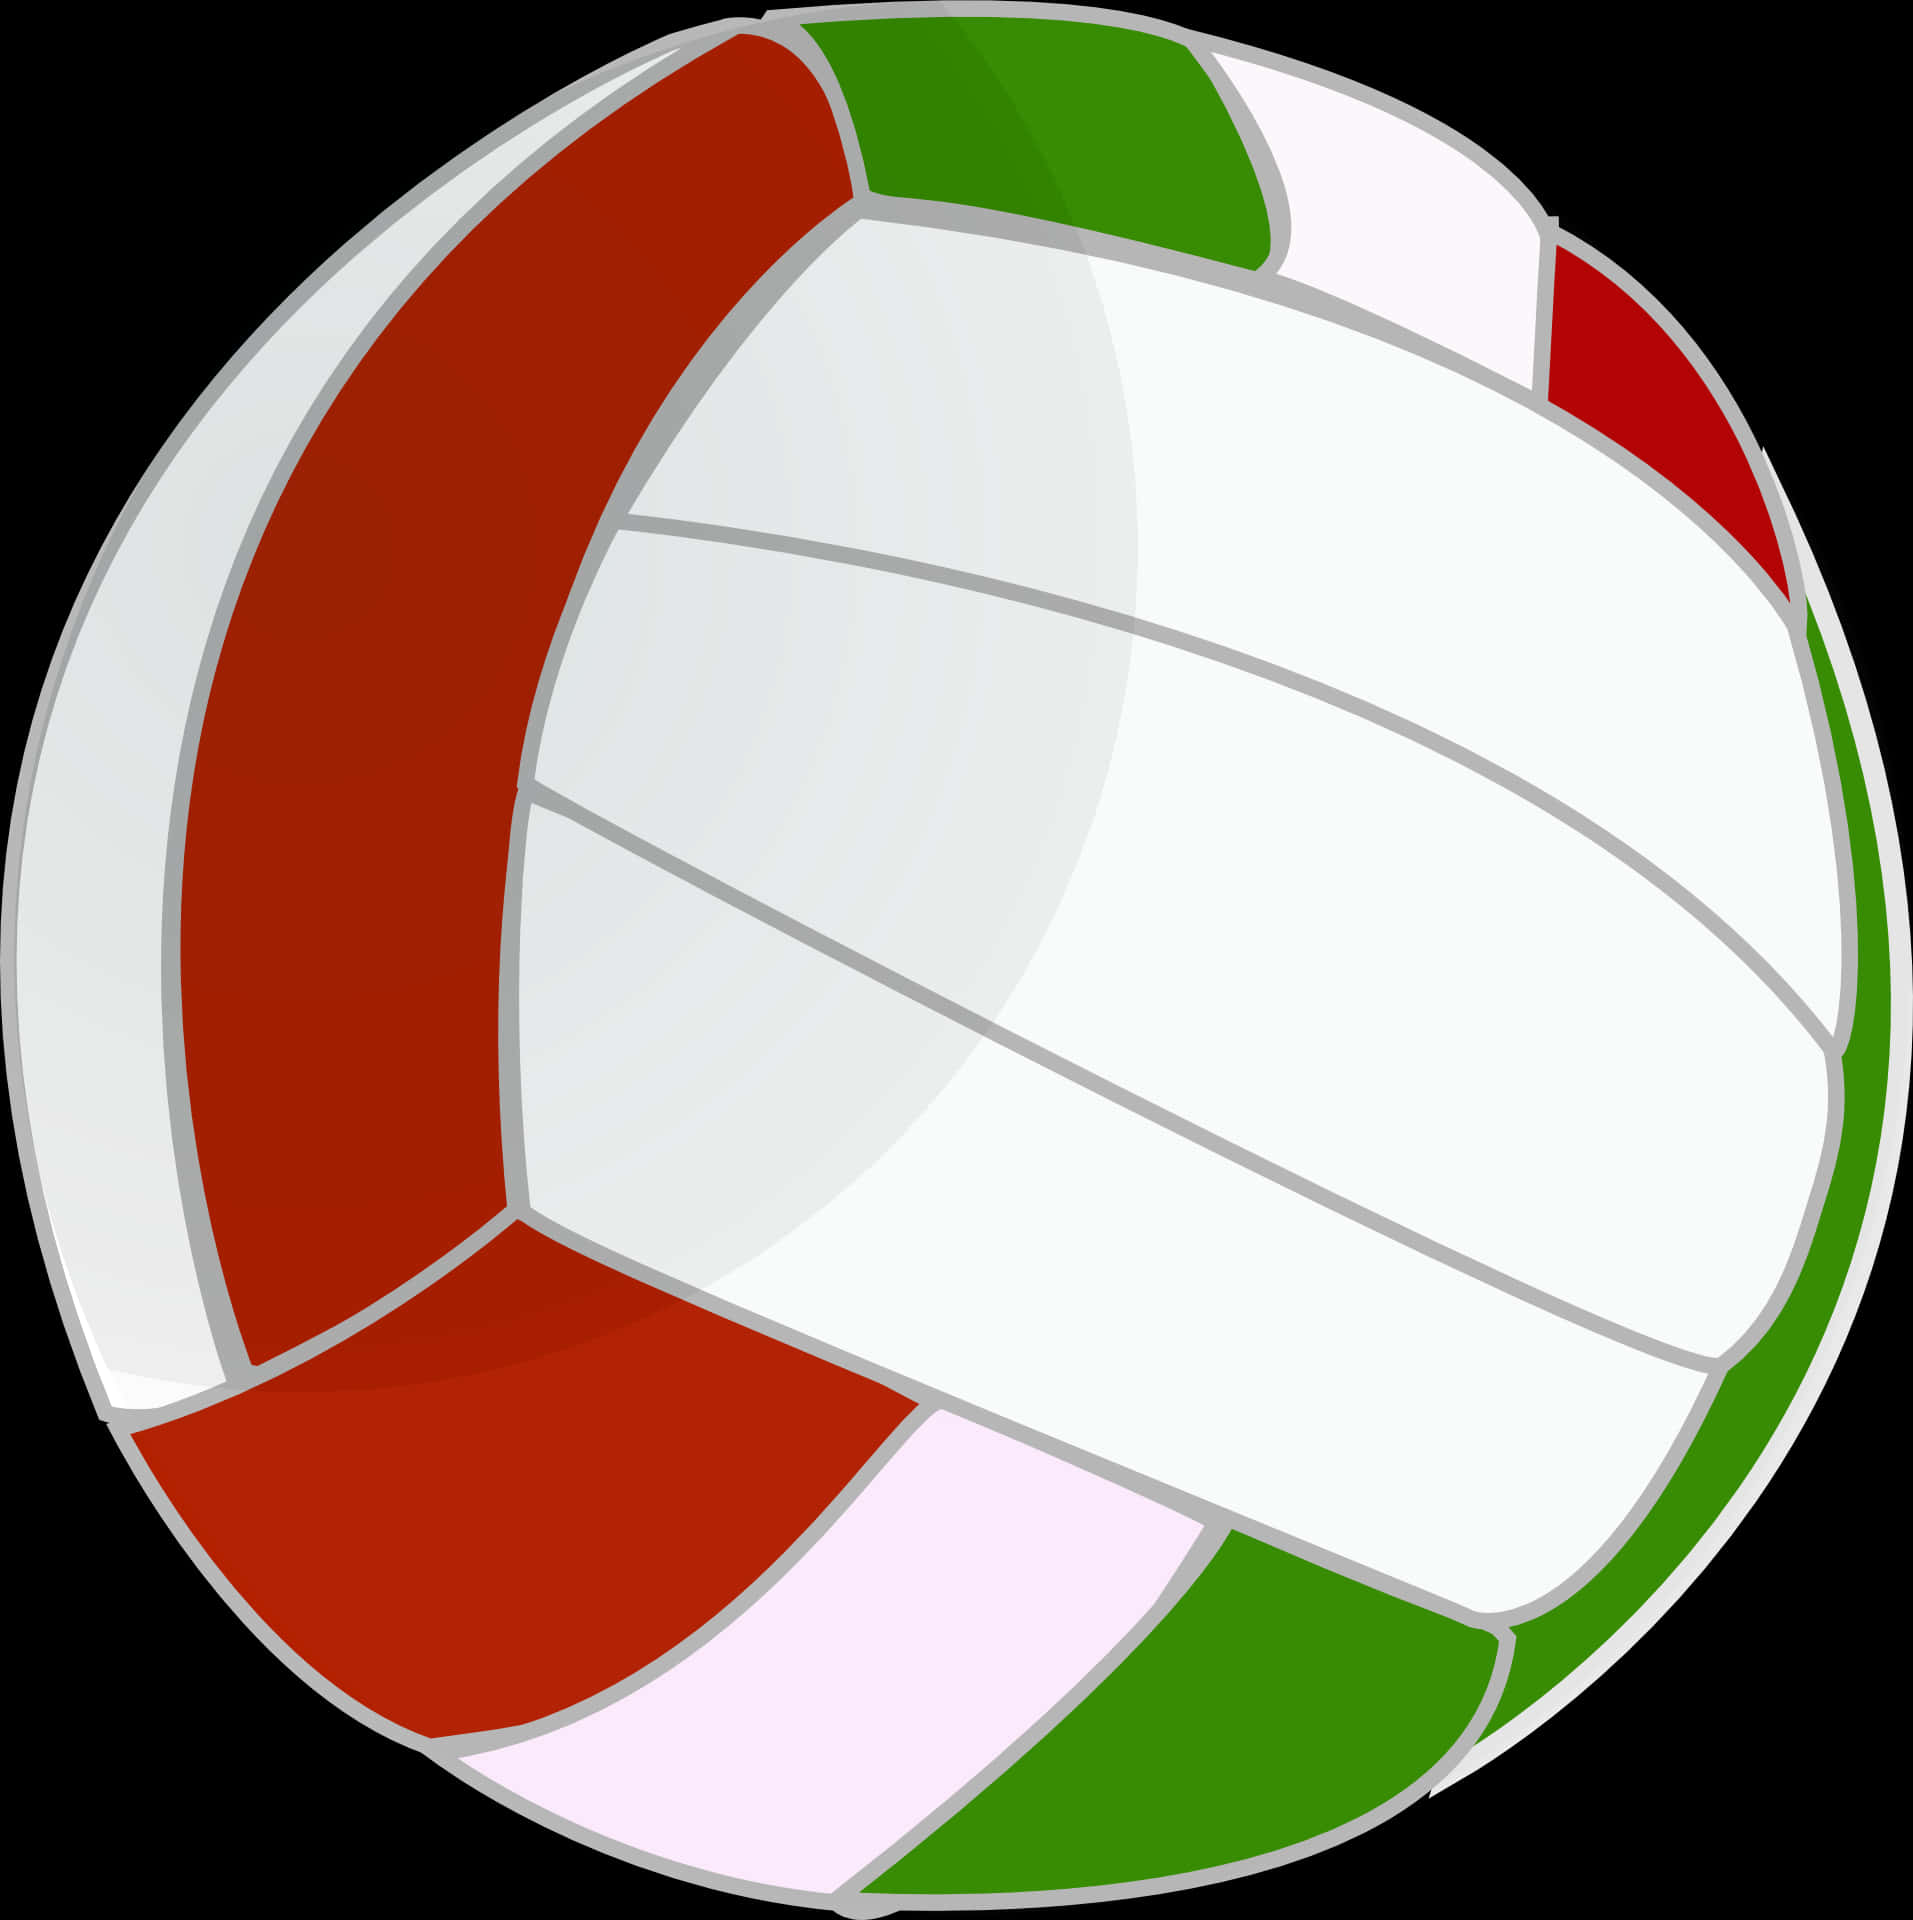 Colorful Volleyball Vector Illustration PNG